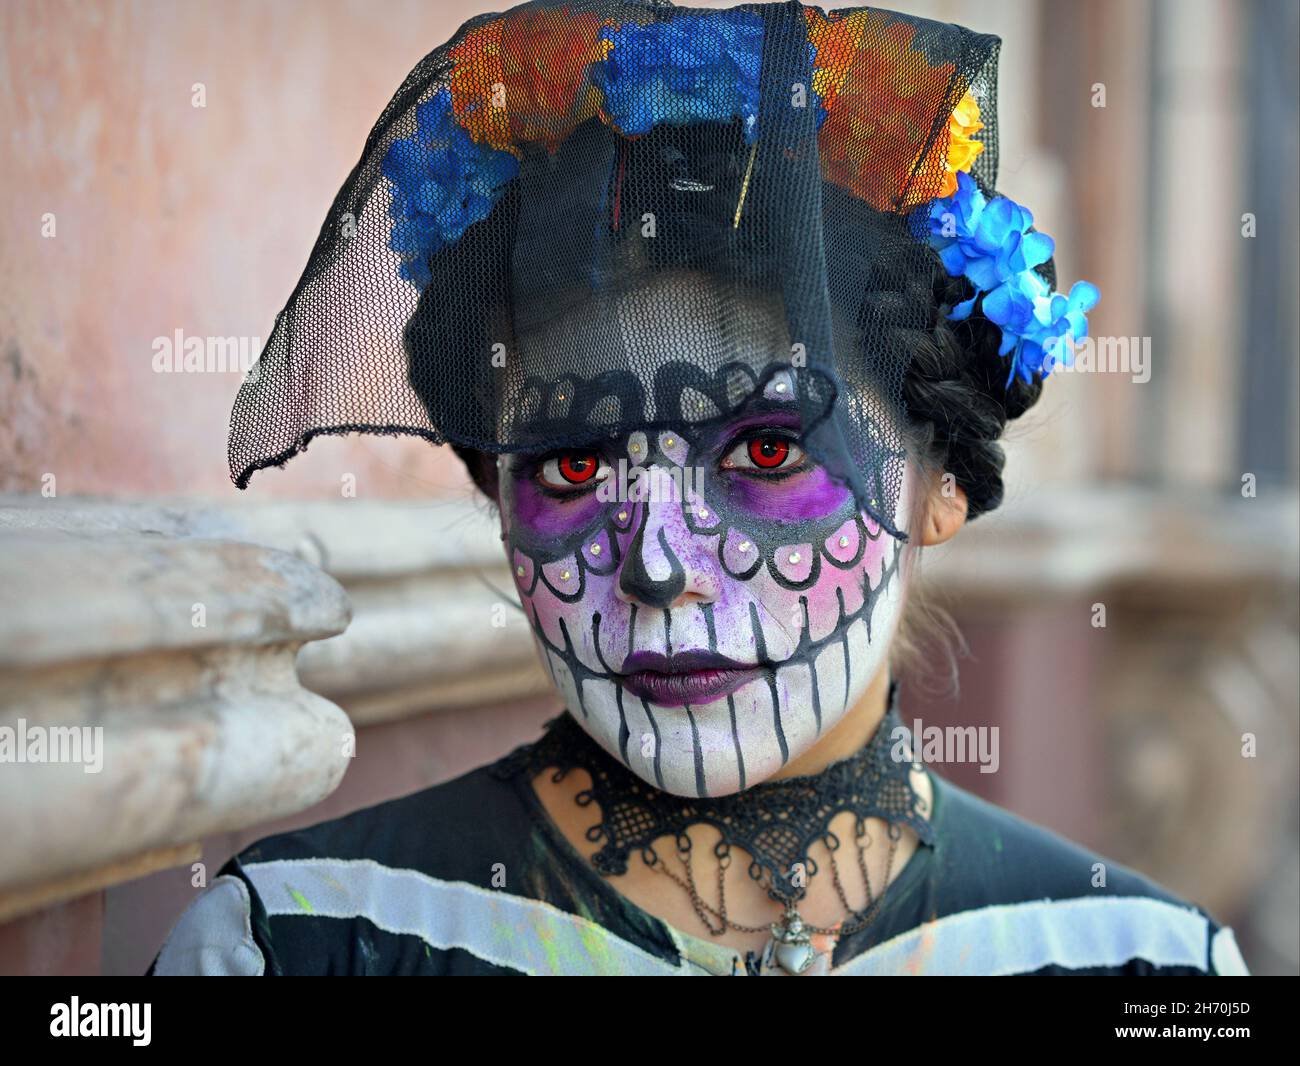 Costumed young Mexican woman with painted face and orange contact lenses wears a black birdcage veil on the Day of the Dead (Día de los Muertos). Stock Photo